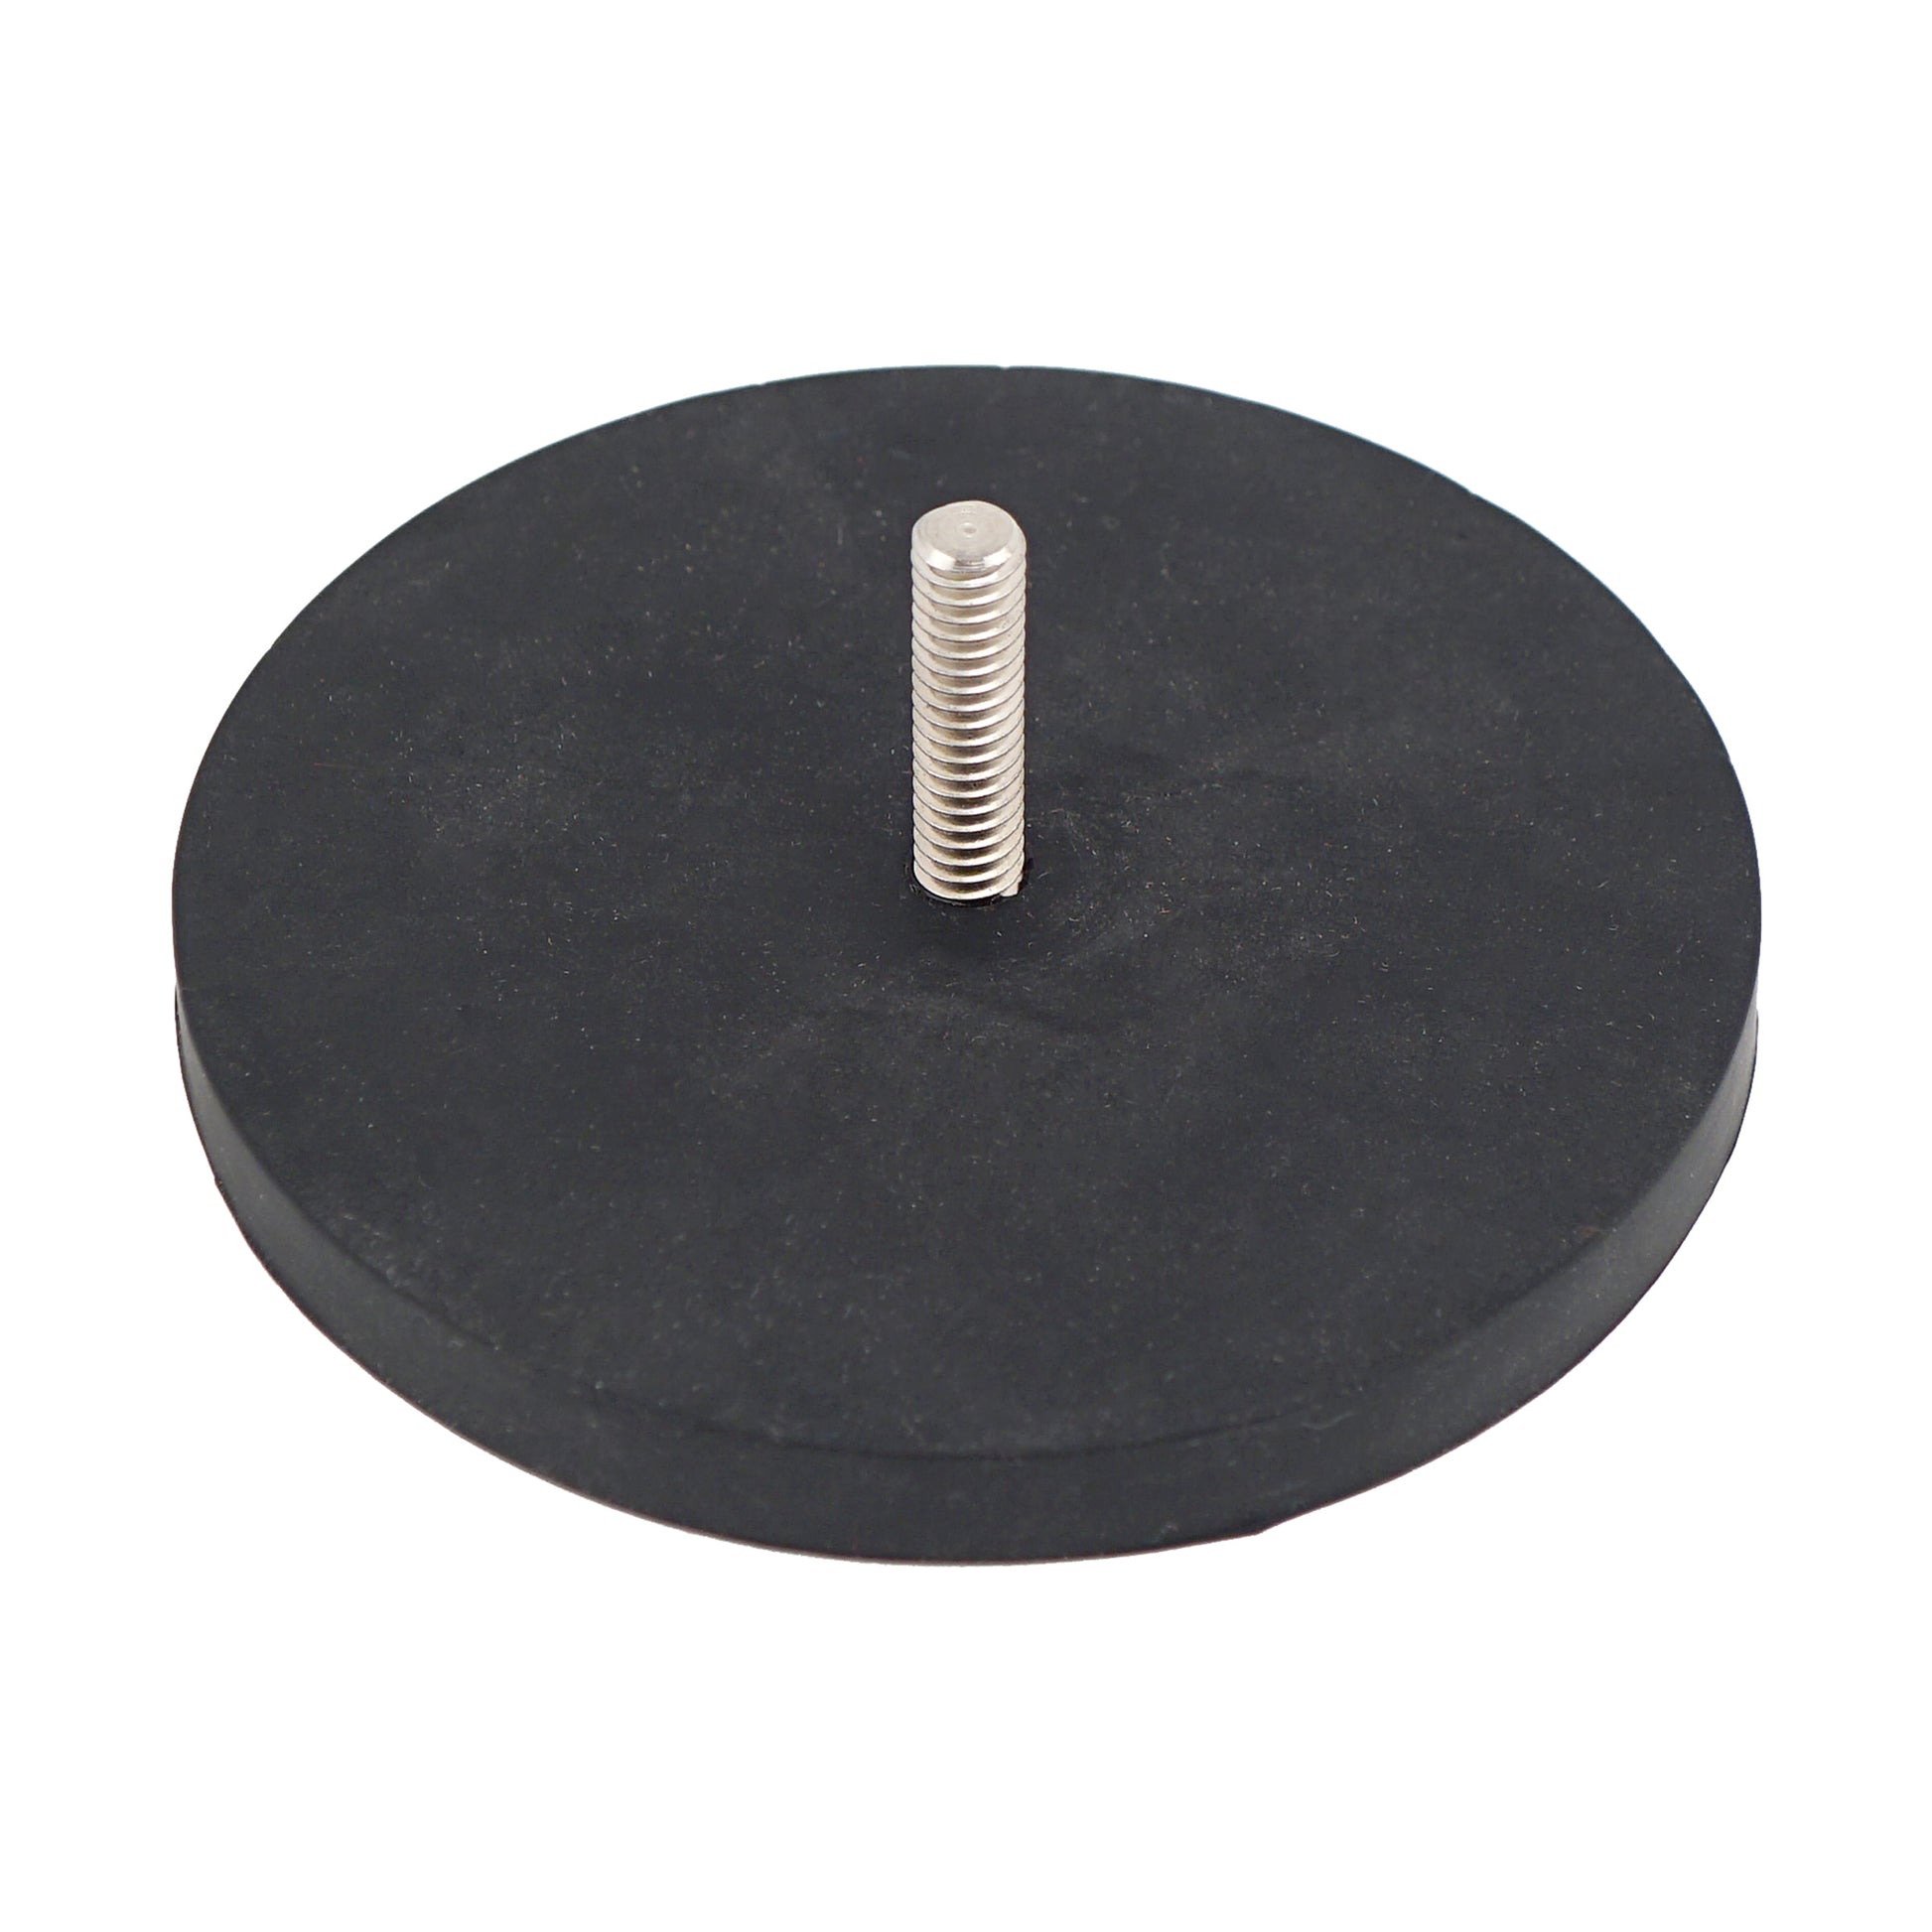 Load image into Gallery viewer, NADR257M Neodymium Rubber Coated Round Base Magnet with Male Thread - 45 Degree Angle View